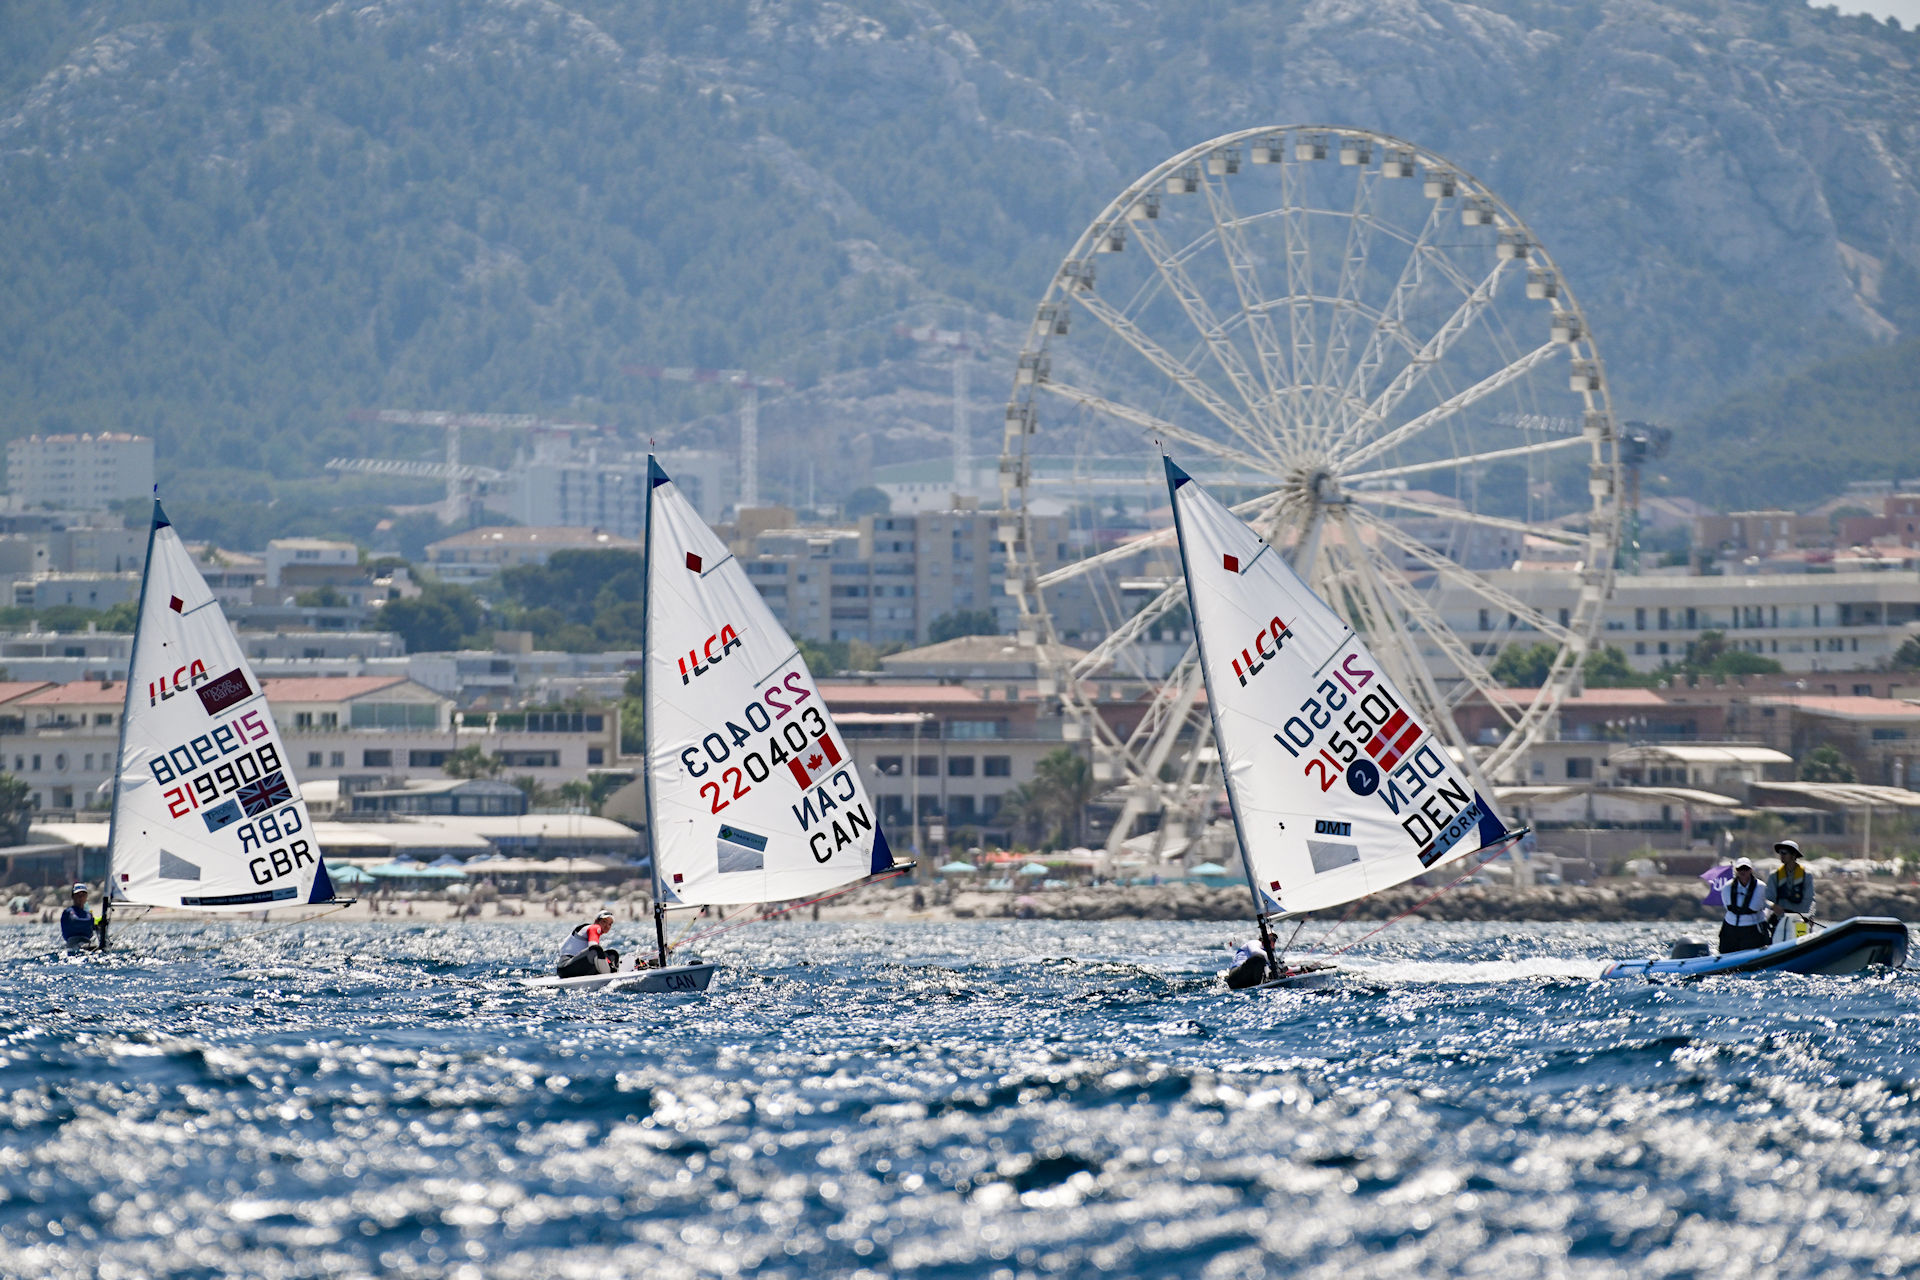 SAILORS TO WATCH FOLLOWING THE PARIS 2024 TEST EVENT